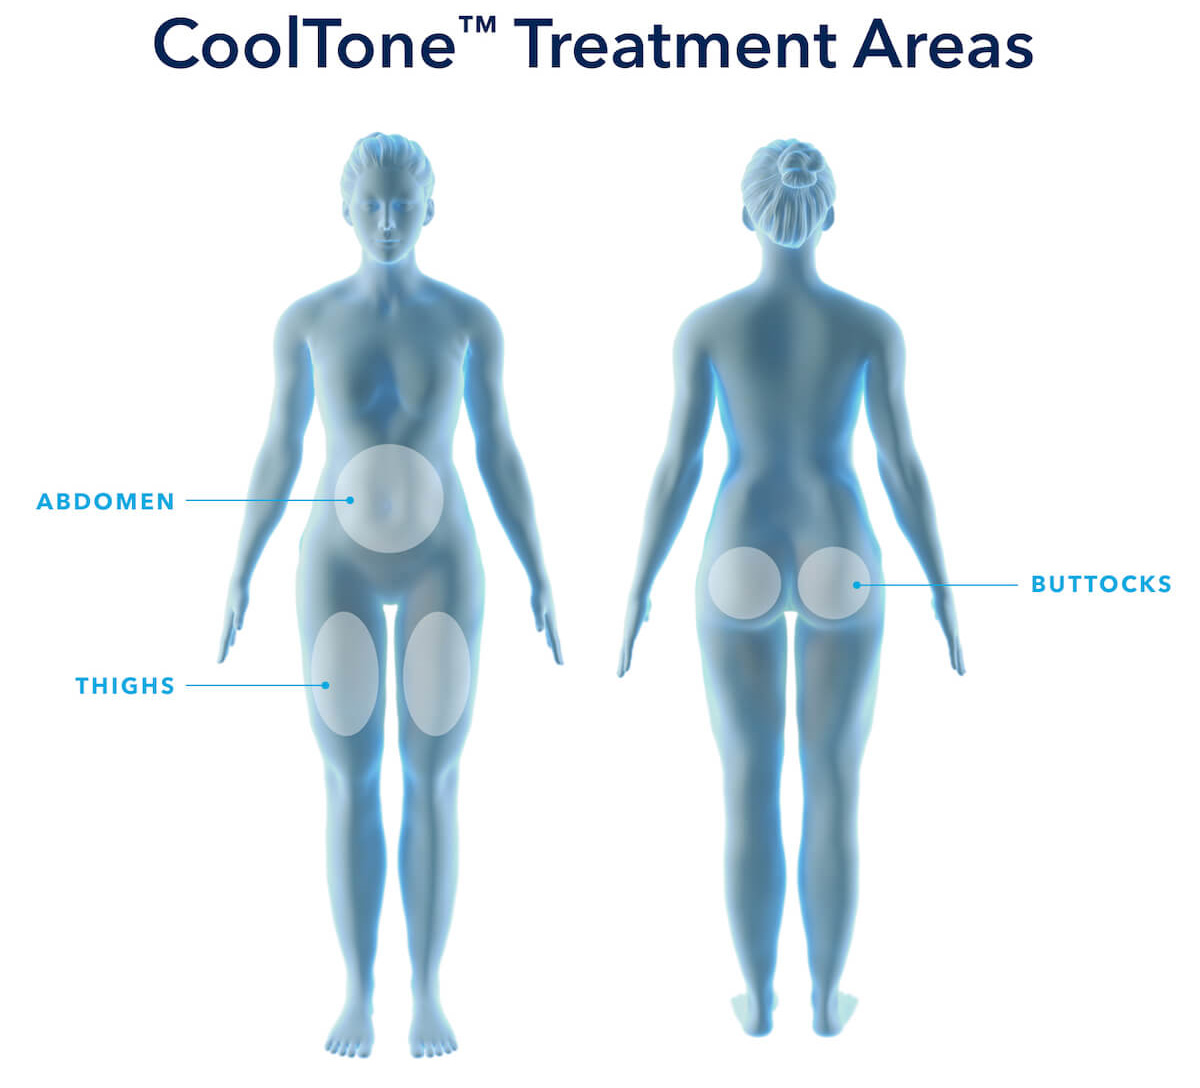 CoolTone treatment areas